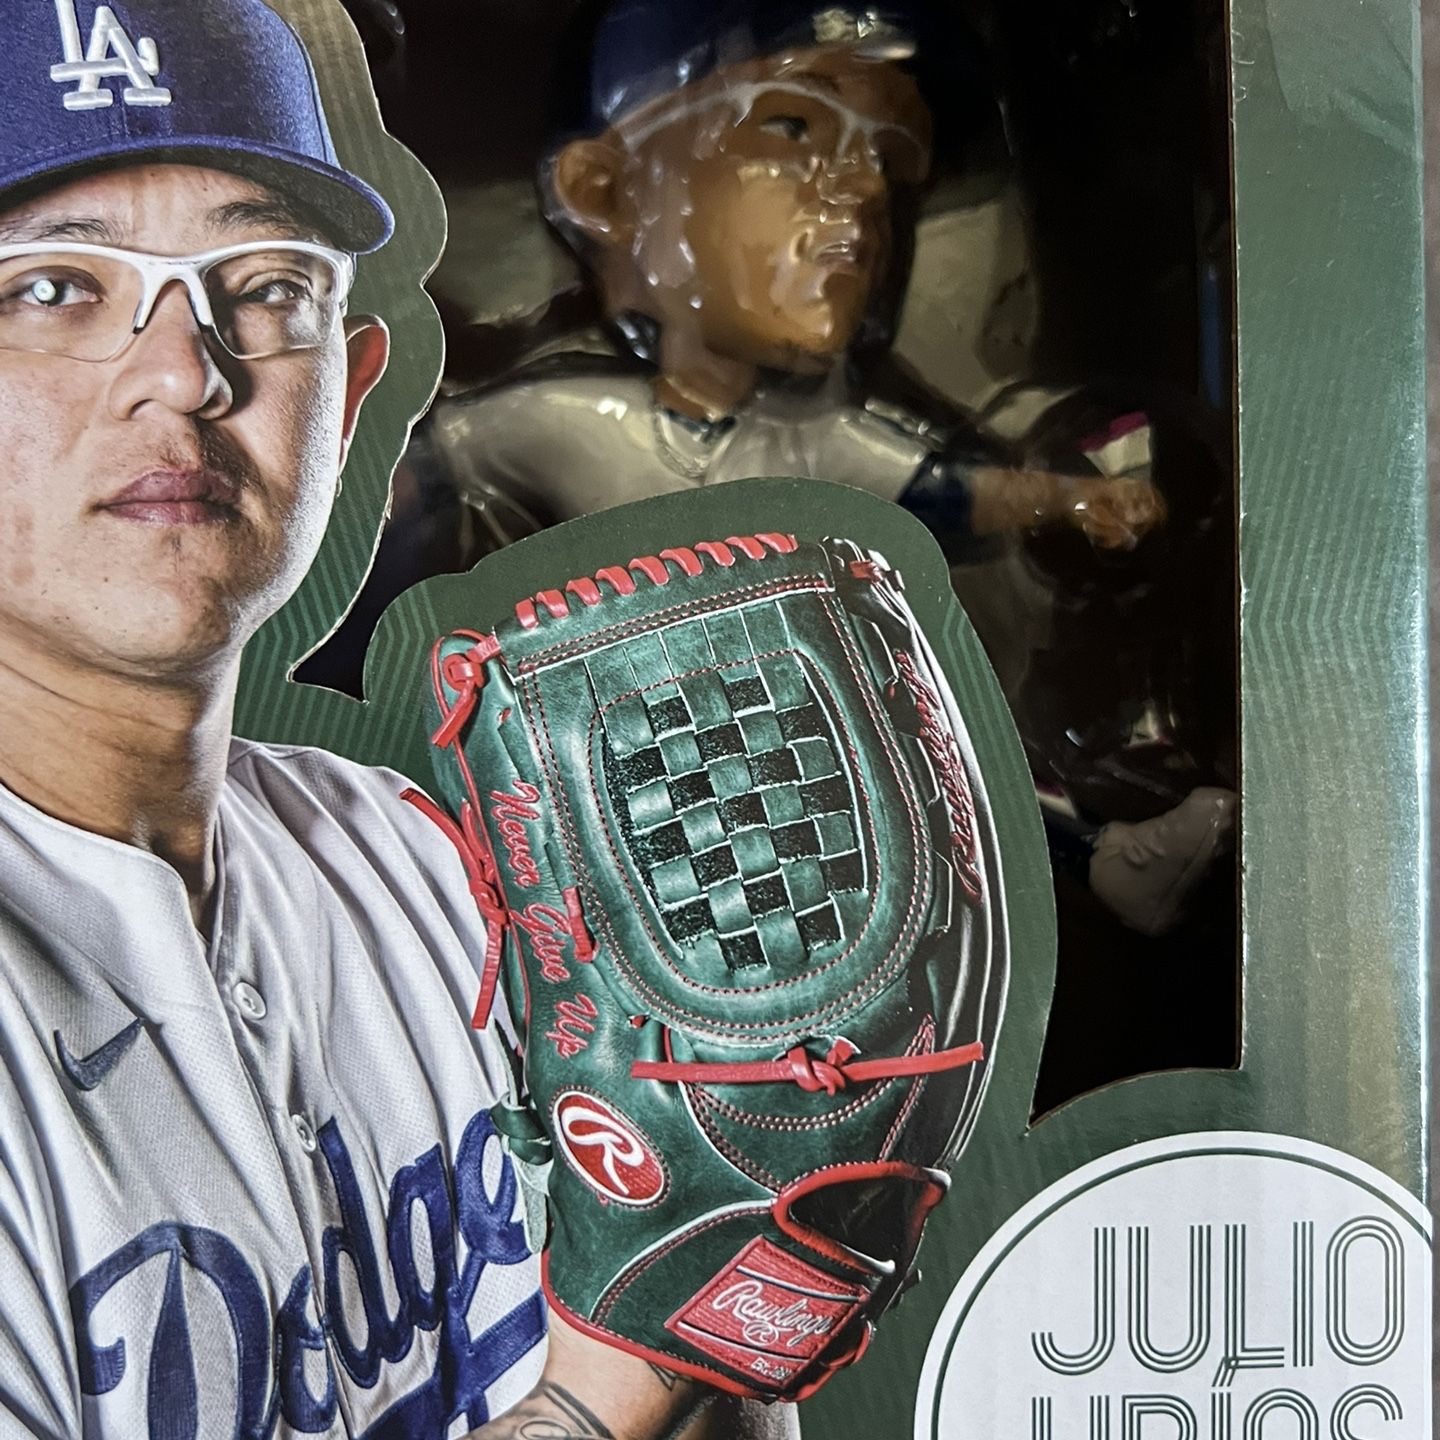 Blue Julio Urias Los Angeles Dodgers Jerseys for Sale in Crystal City, CA -  OfferUp